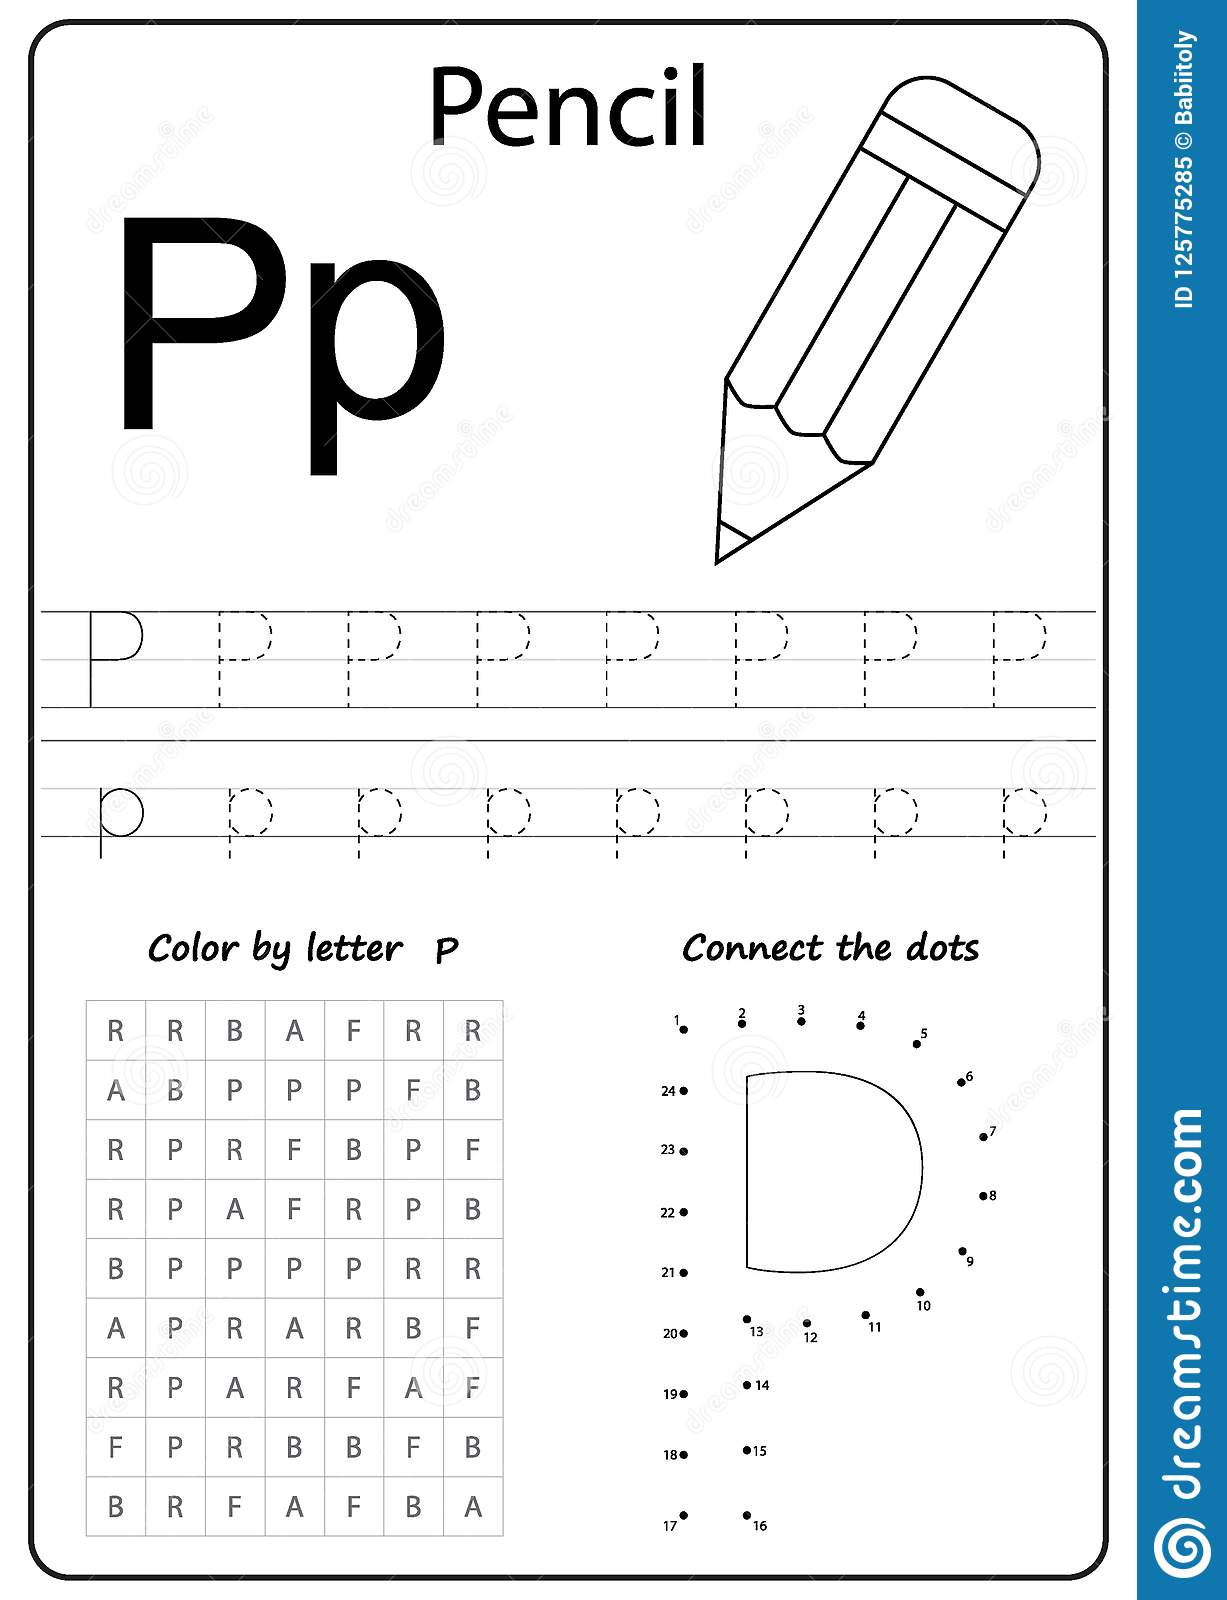 14 Constructive Letter P Worksheets | KittyBabyLove.com